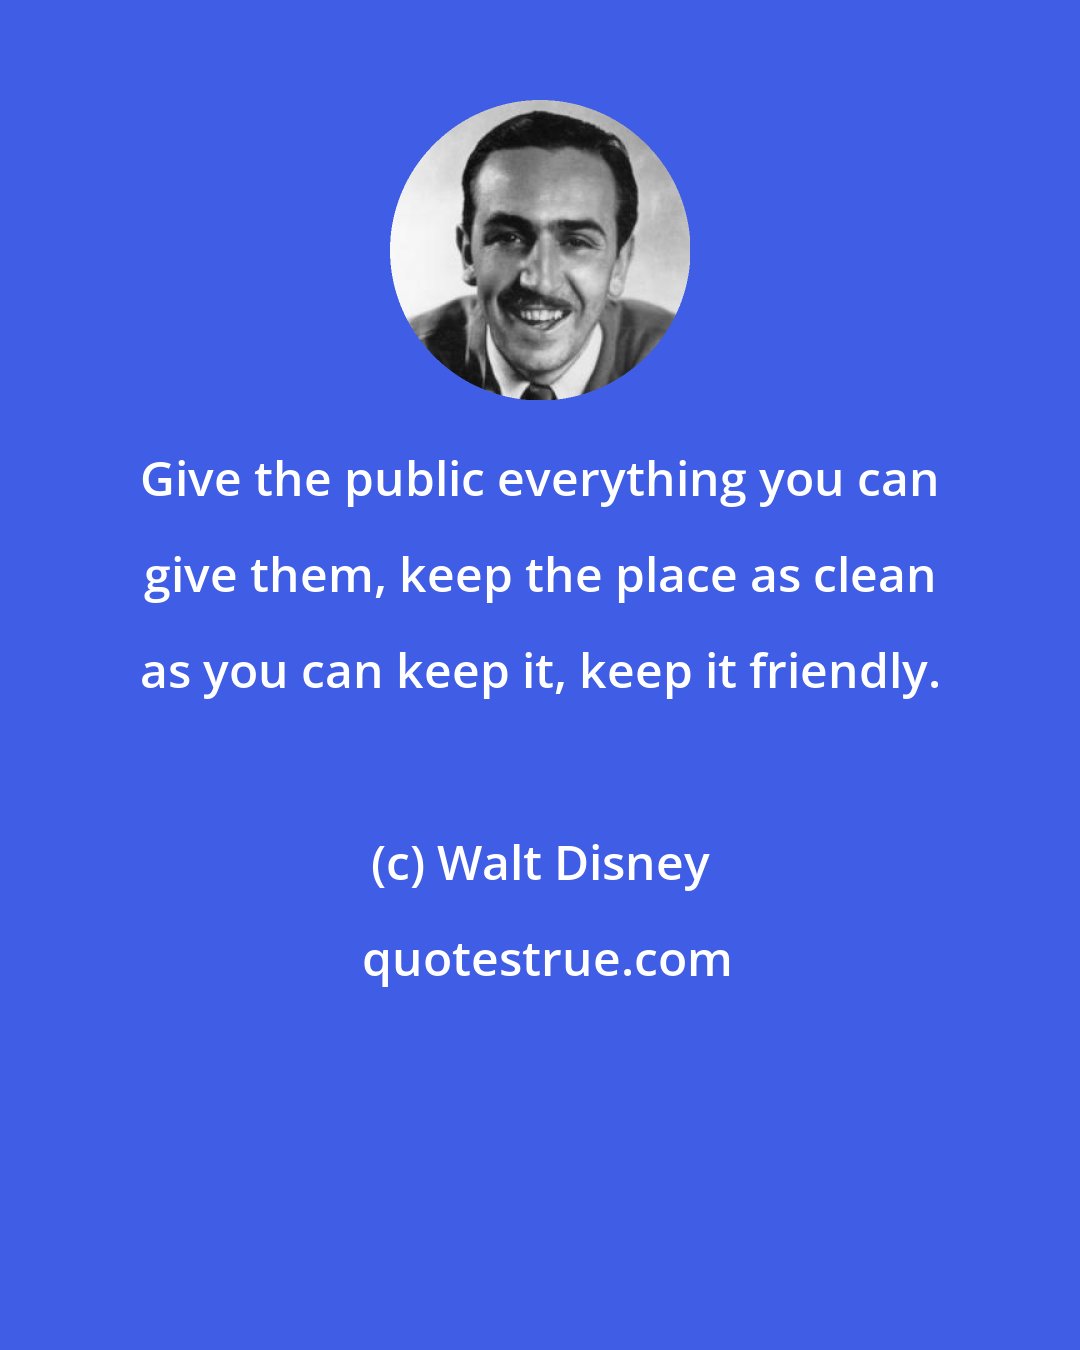 Walt Disney: Give the public everything you can give them, keep the place as clean as you can keep it, keep it friendly.